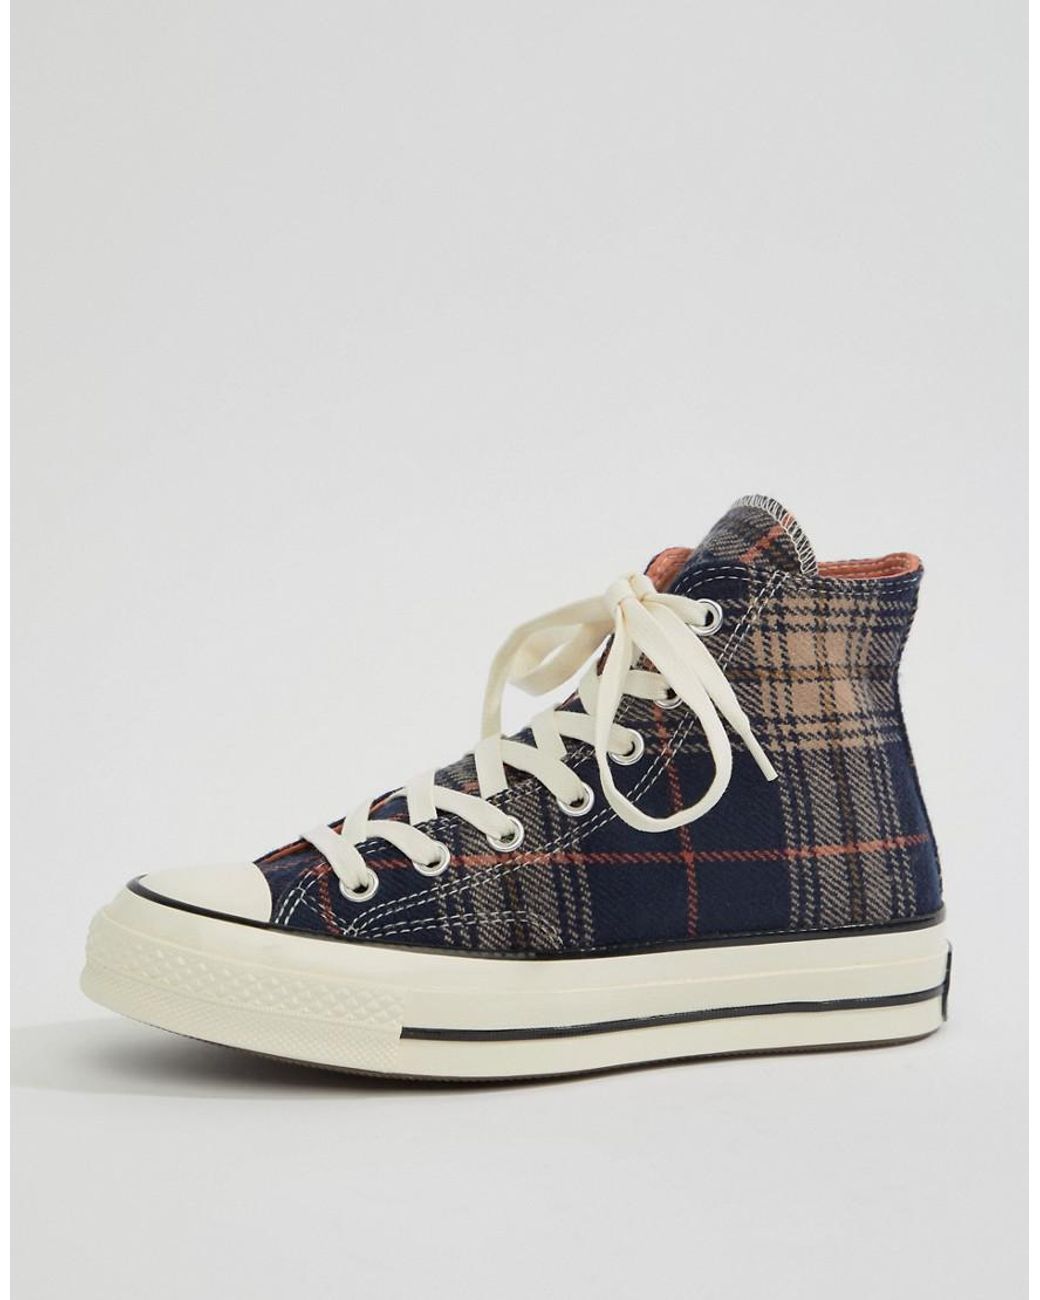 Converse Chuck 70 Hi Navy Plaid Sneakers in Blue | Lyst